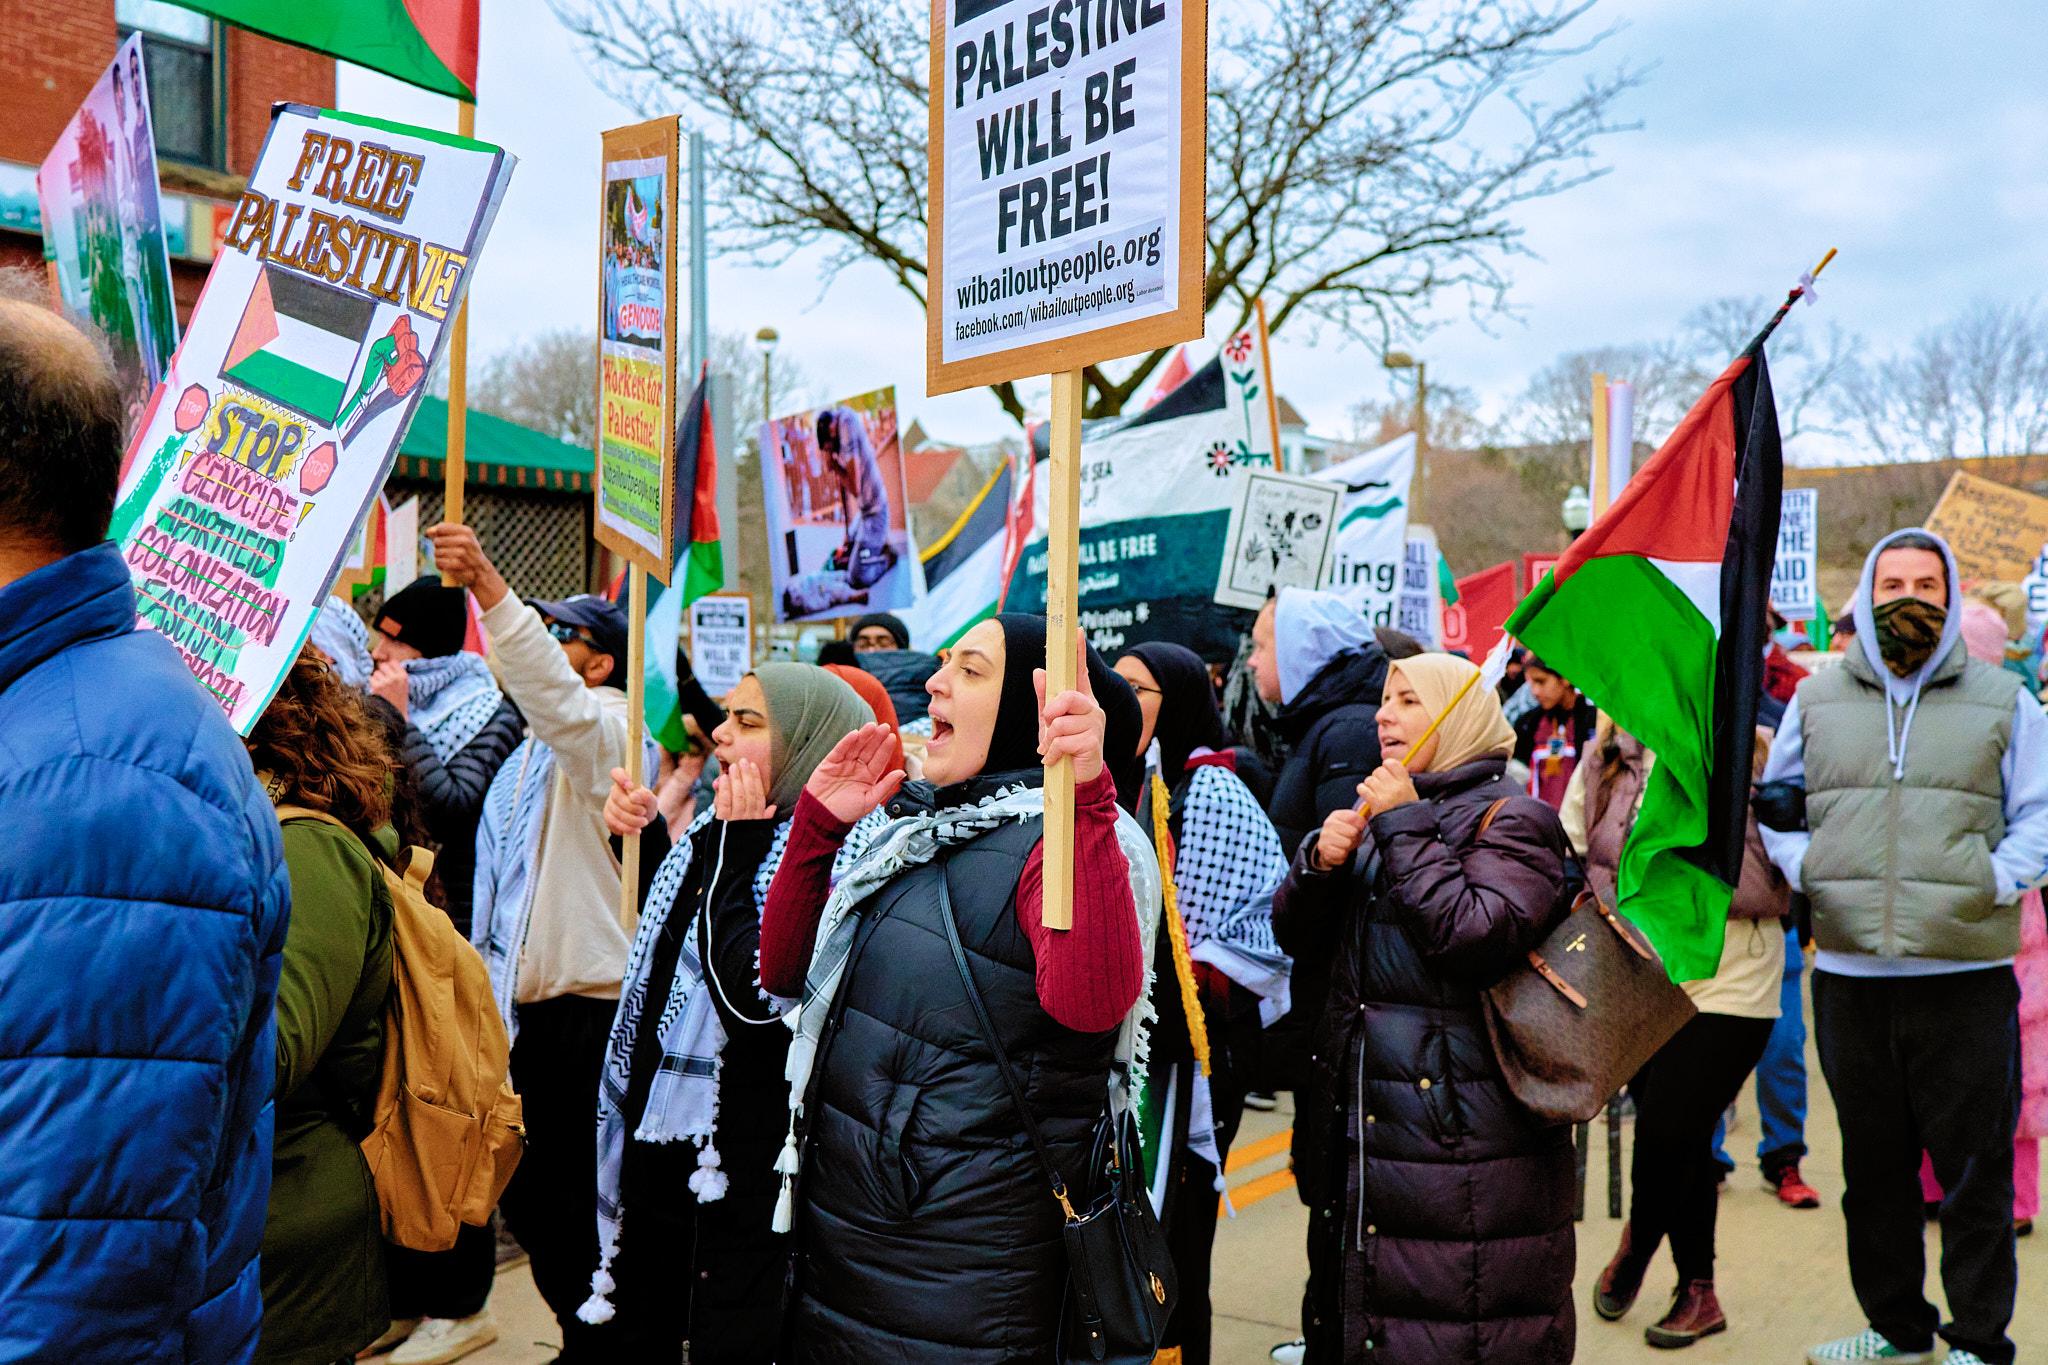 Wisconsin All Out for Palestine March and Rally - 